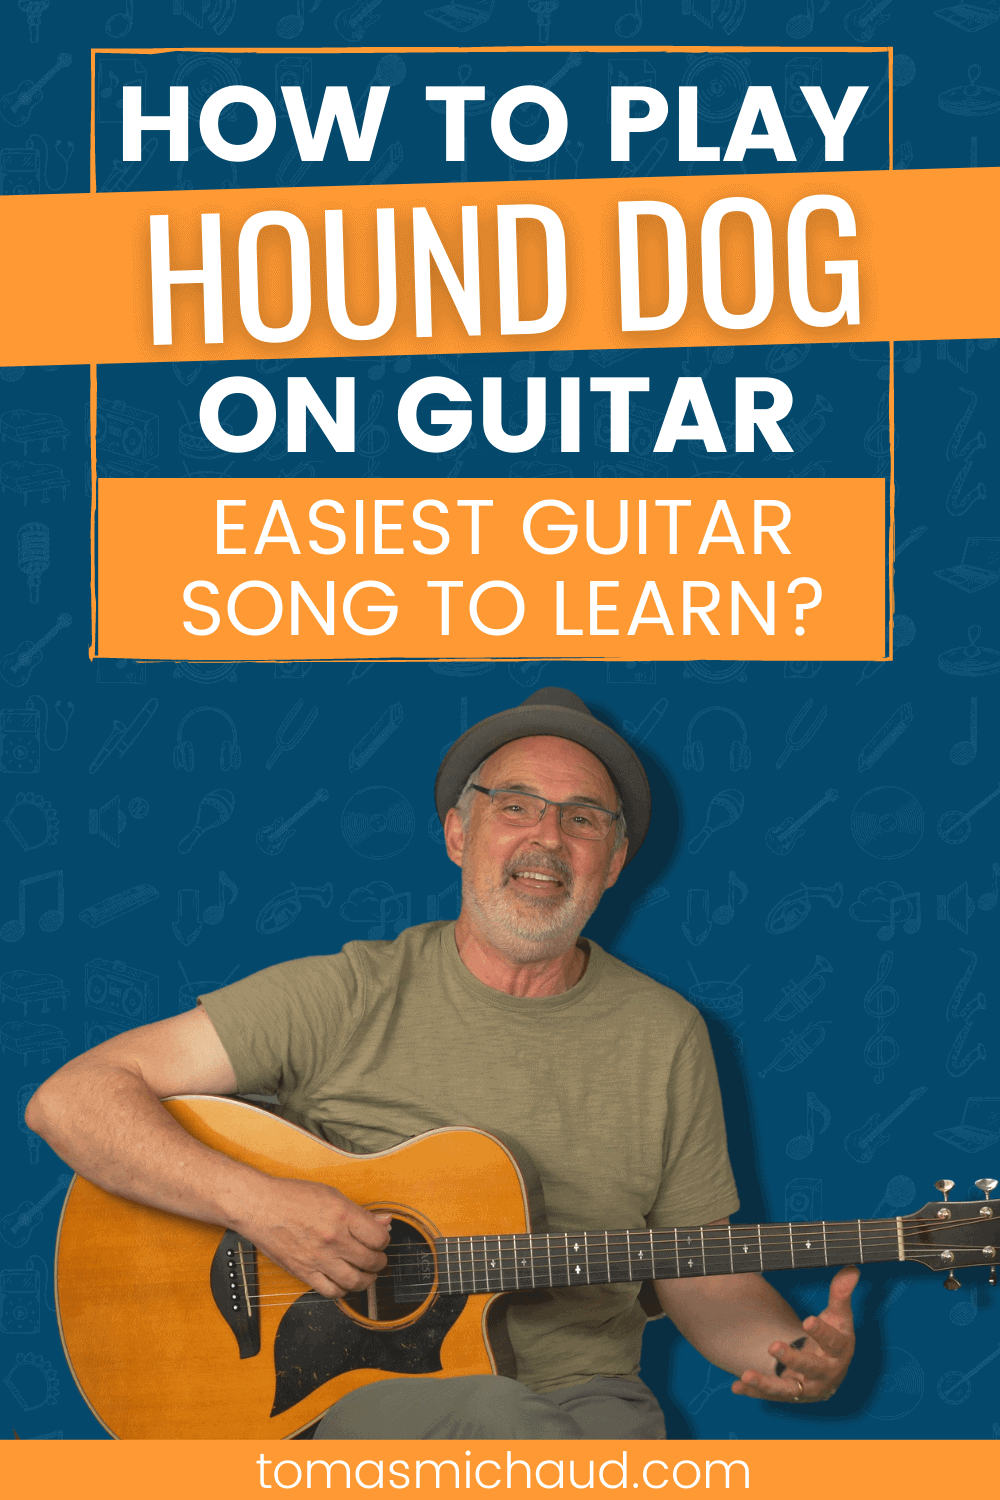 How to Play Hound Dog on Guitar. Easiest Guitar Song to Learn